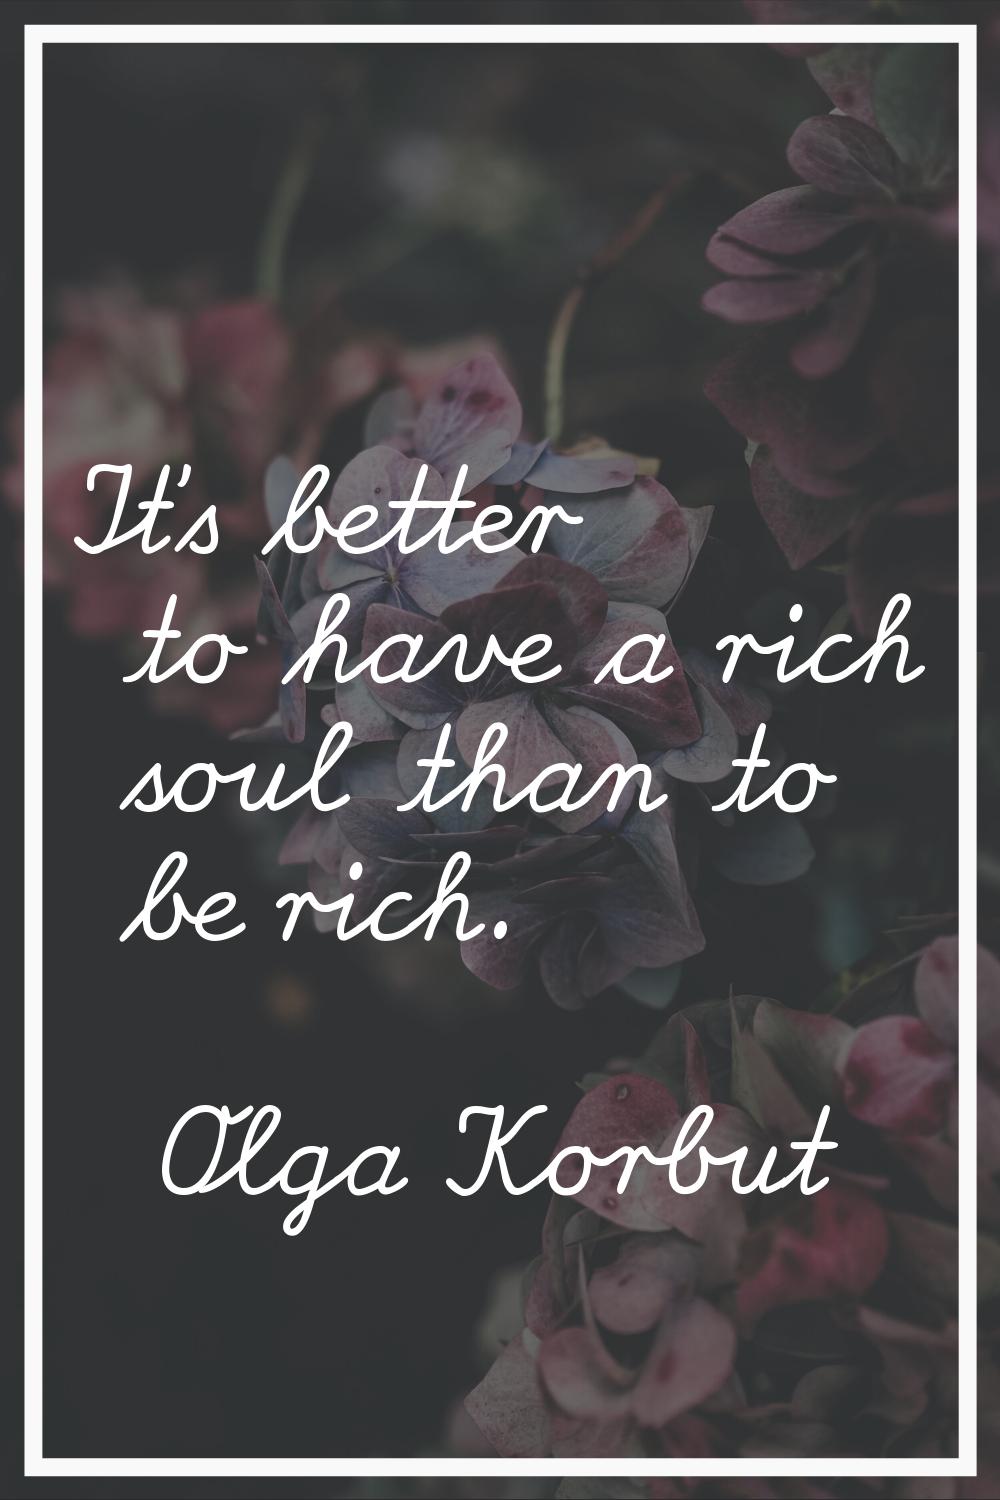 It's better to have a rich soul than to be rich.